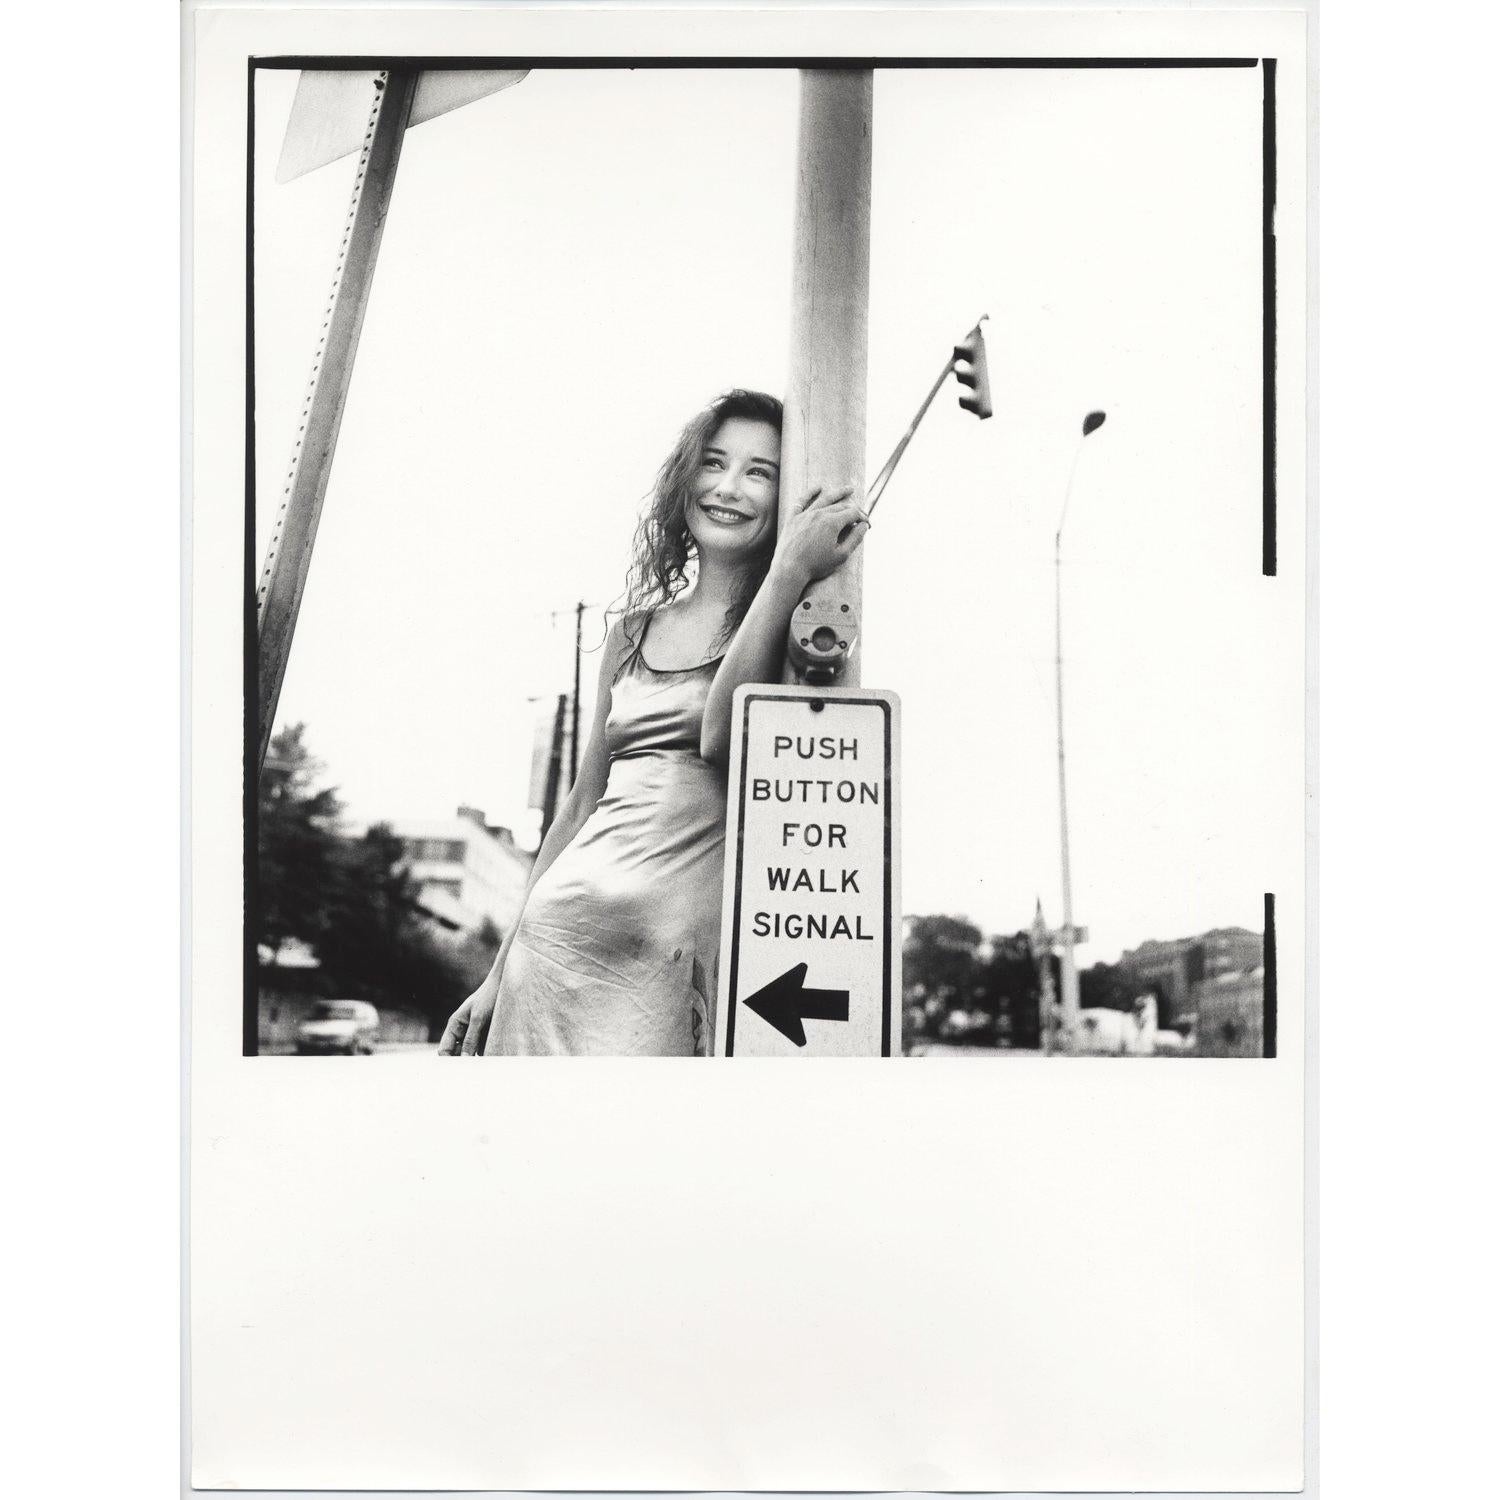 Original hand-printed vintage 12x16” darkroom print from photographer Jake Chessum of Tori Amos. Printed by Jake in the 90's, at the time of the photo shoot.

Jake recalls the session: “Tori Amos played two nights in Atlanta, Ga. in 1994 and Mark